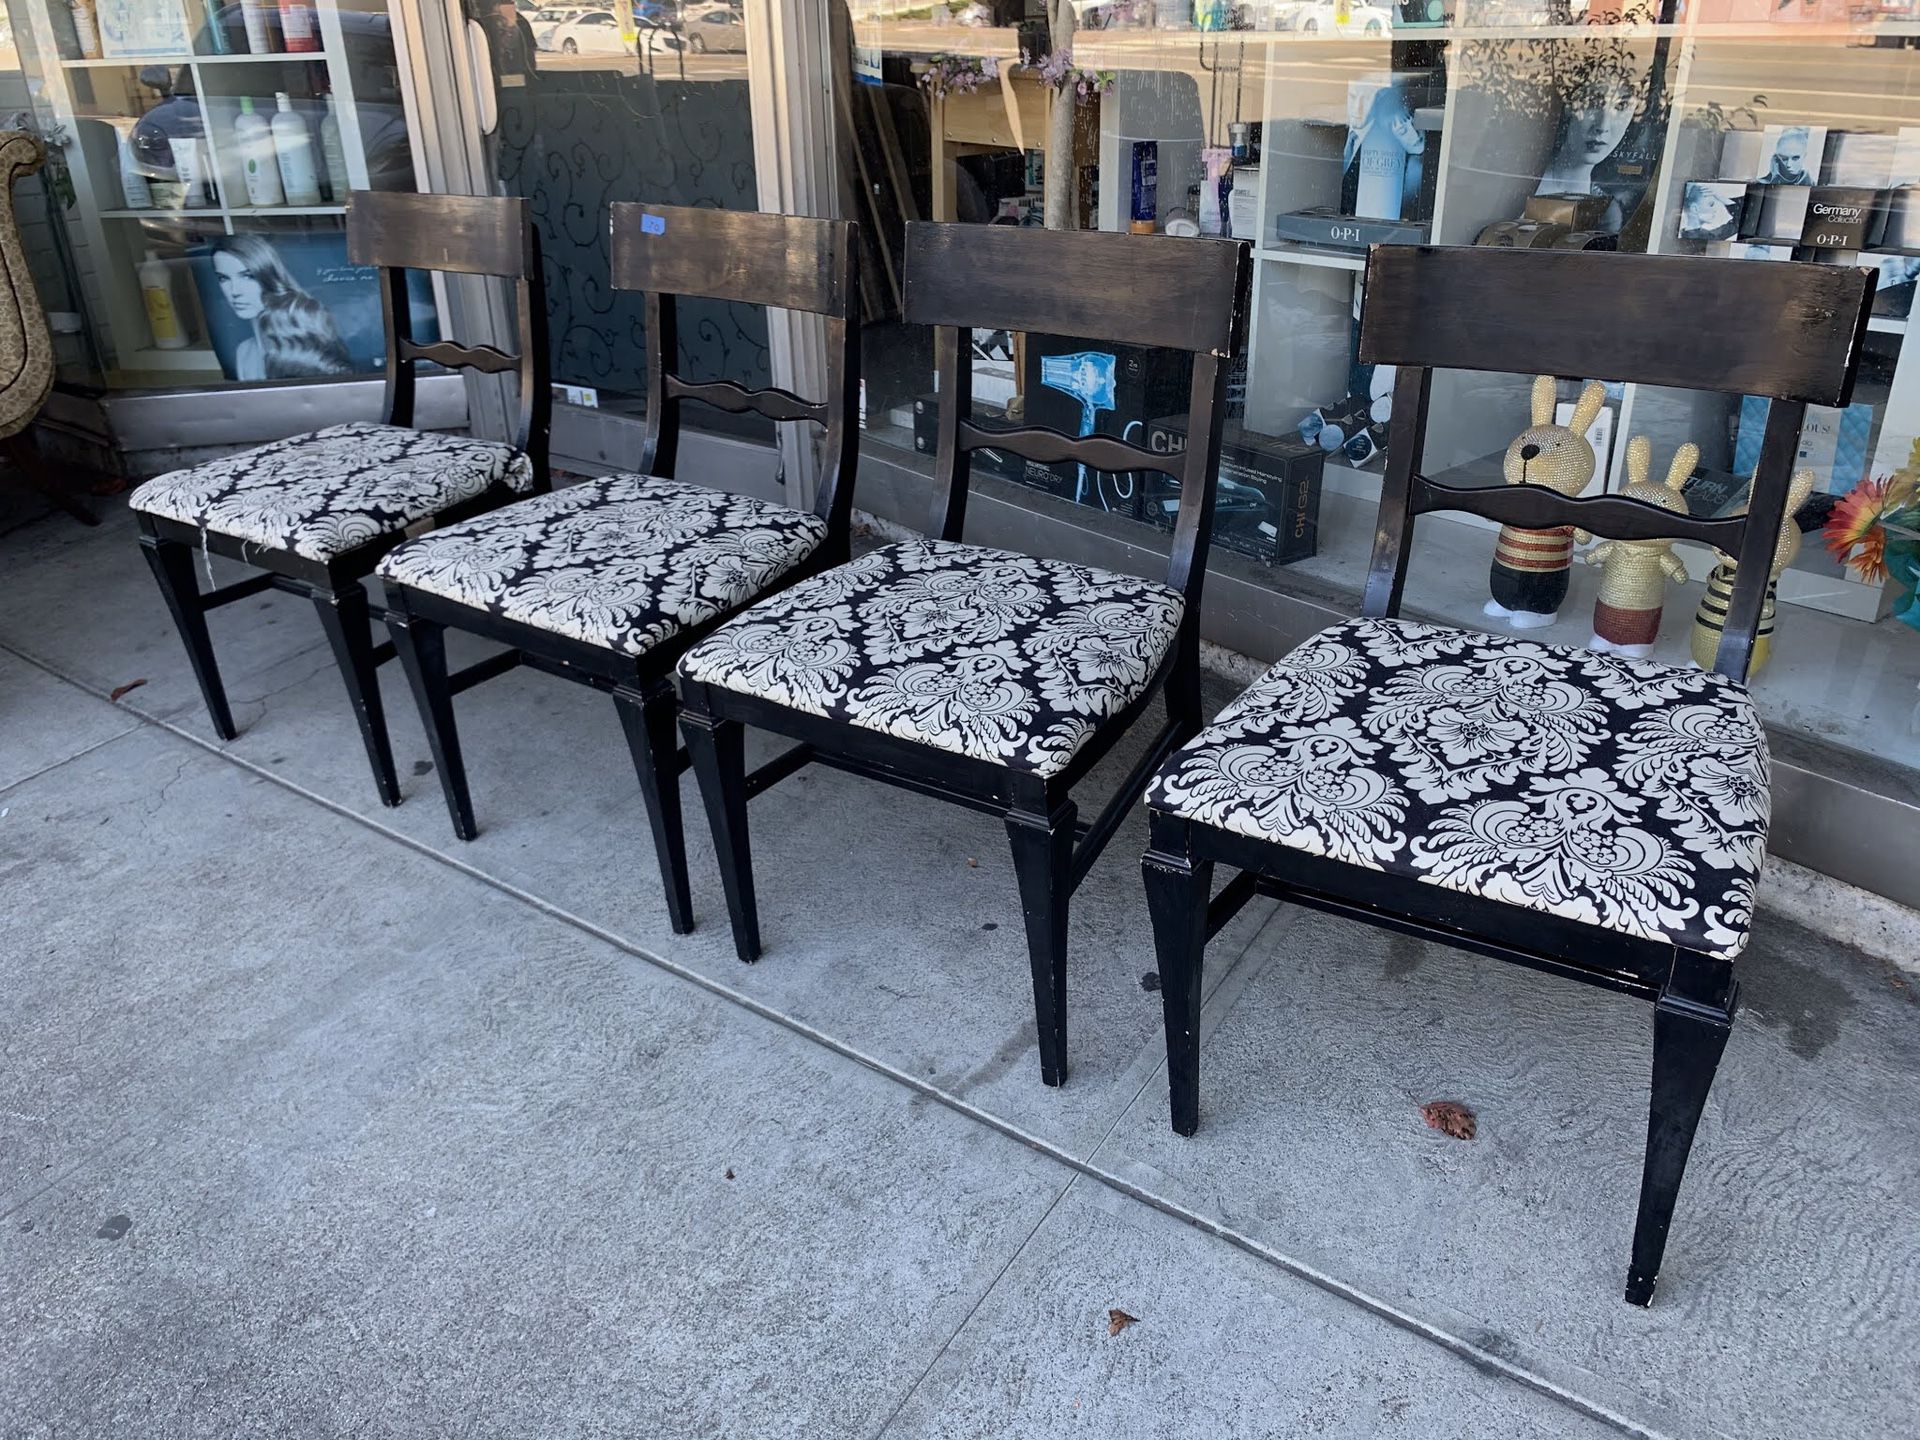 **BARGAIN BUY** #100448 Set of 4 Black Dining Chairs with Black and White Patterned Seats